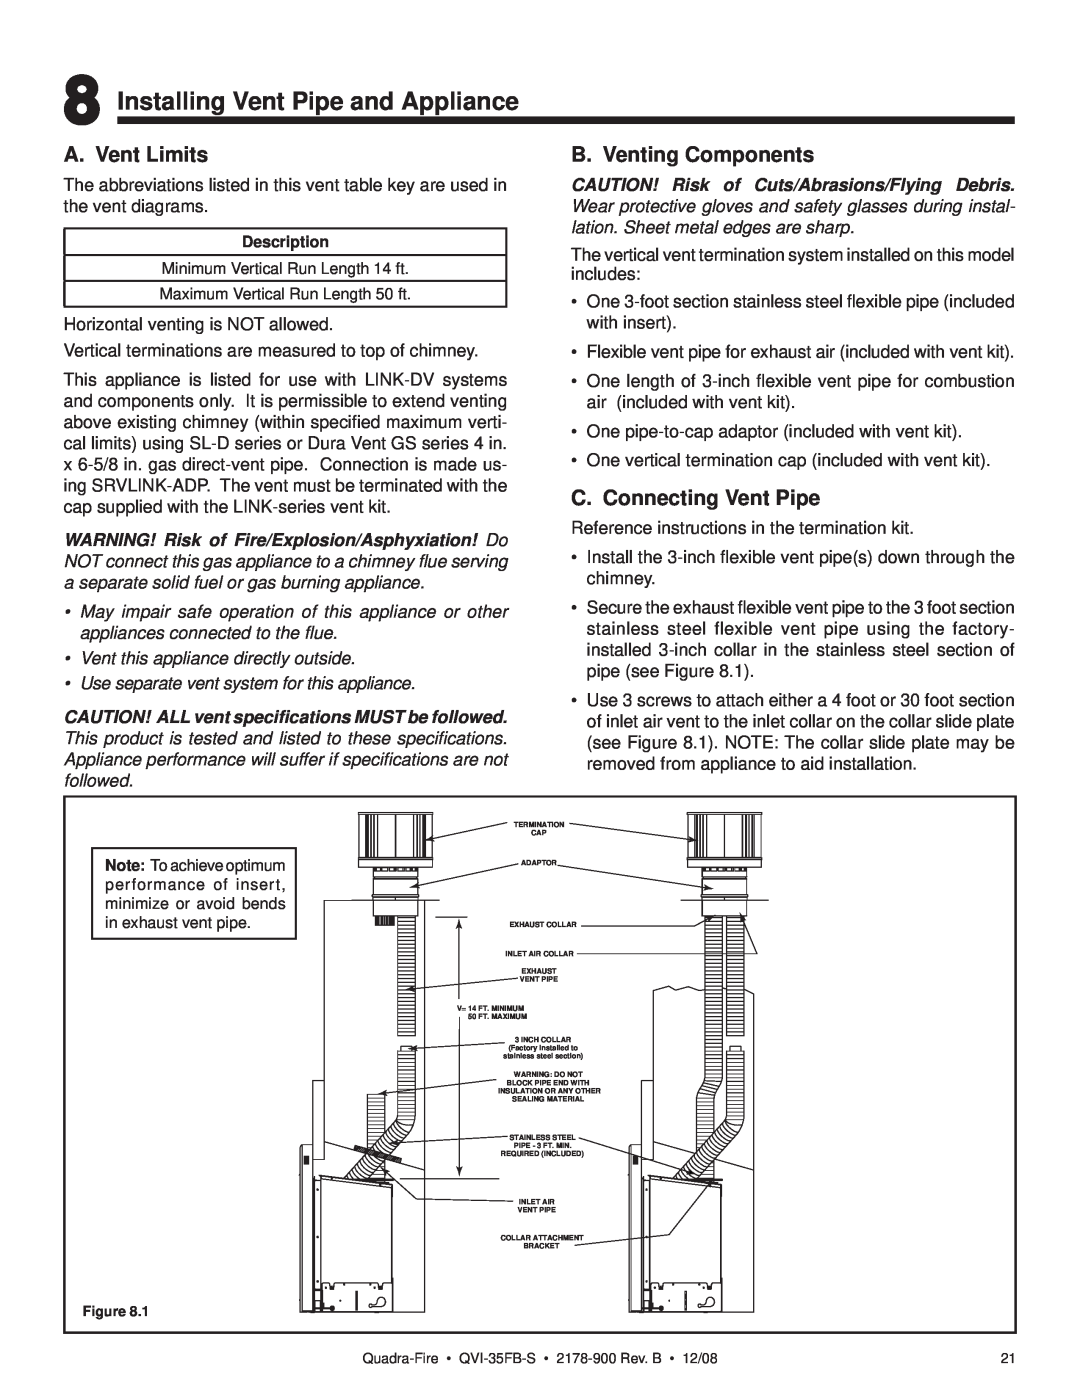 Quadra-Fire QVI-35FB-S Installing Vent Pipe and Appliance, A. Vent Limits, B. Venting Components, C. Connecting Vent Pipe 